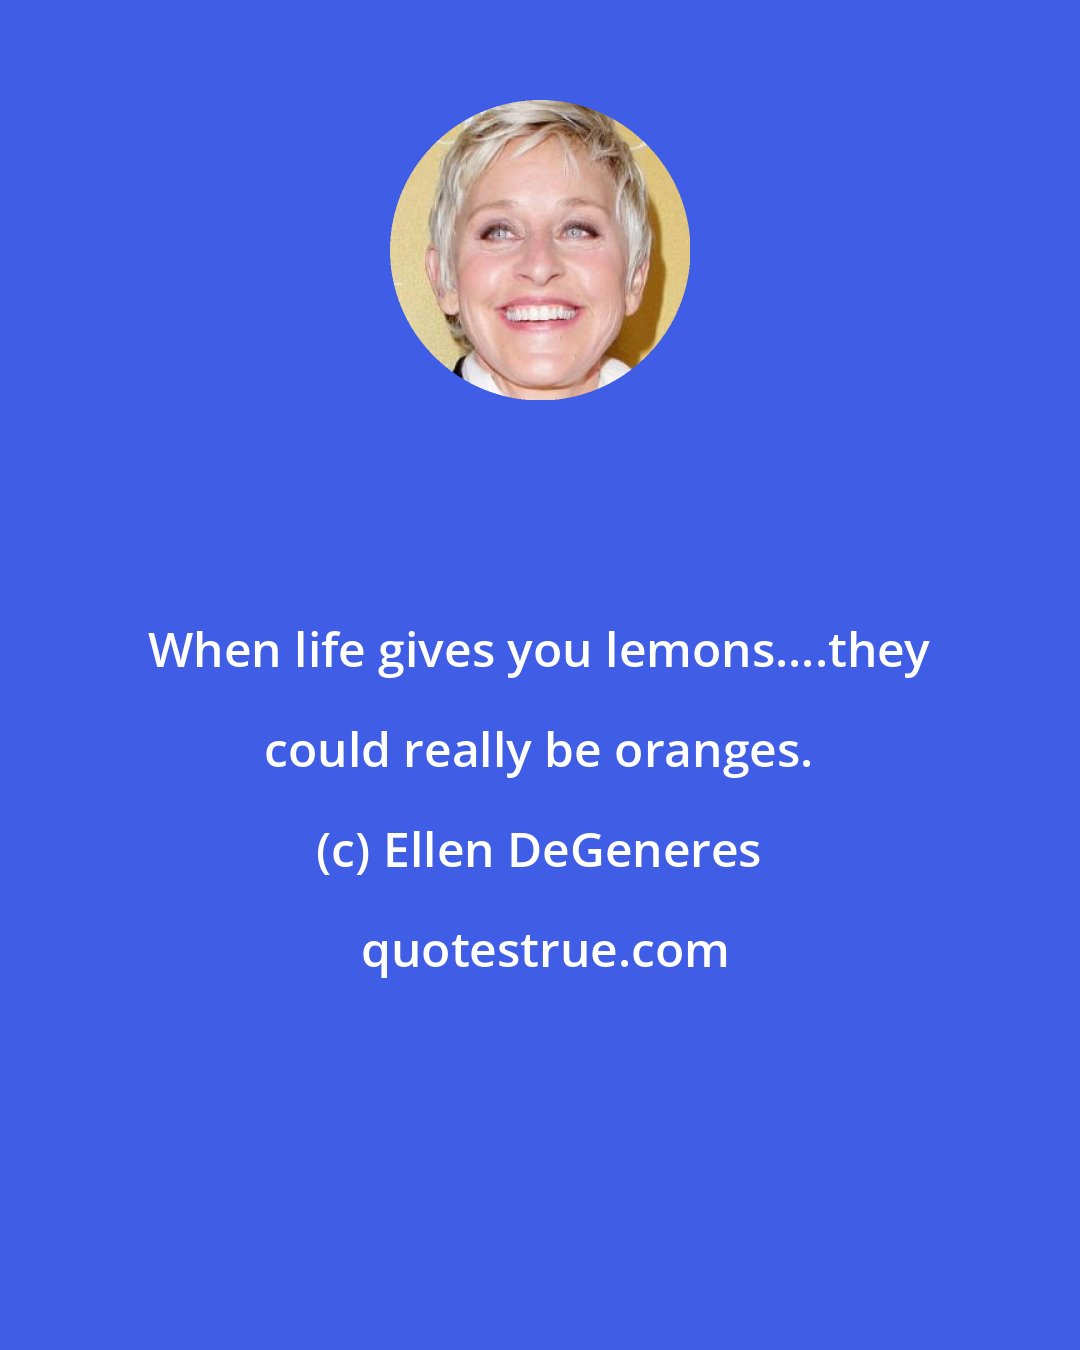 Ellen DeGeneres: When life gives you lemons....they could really be oranges.